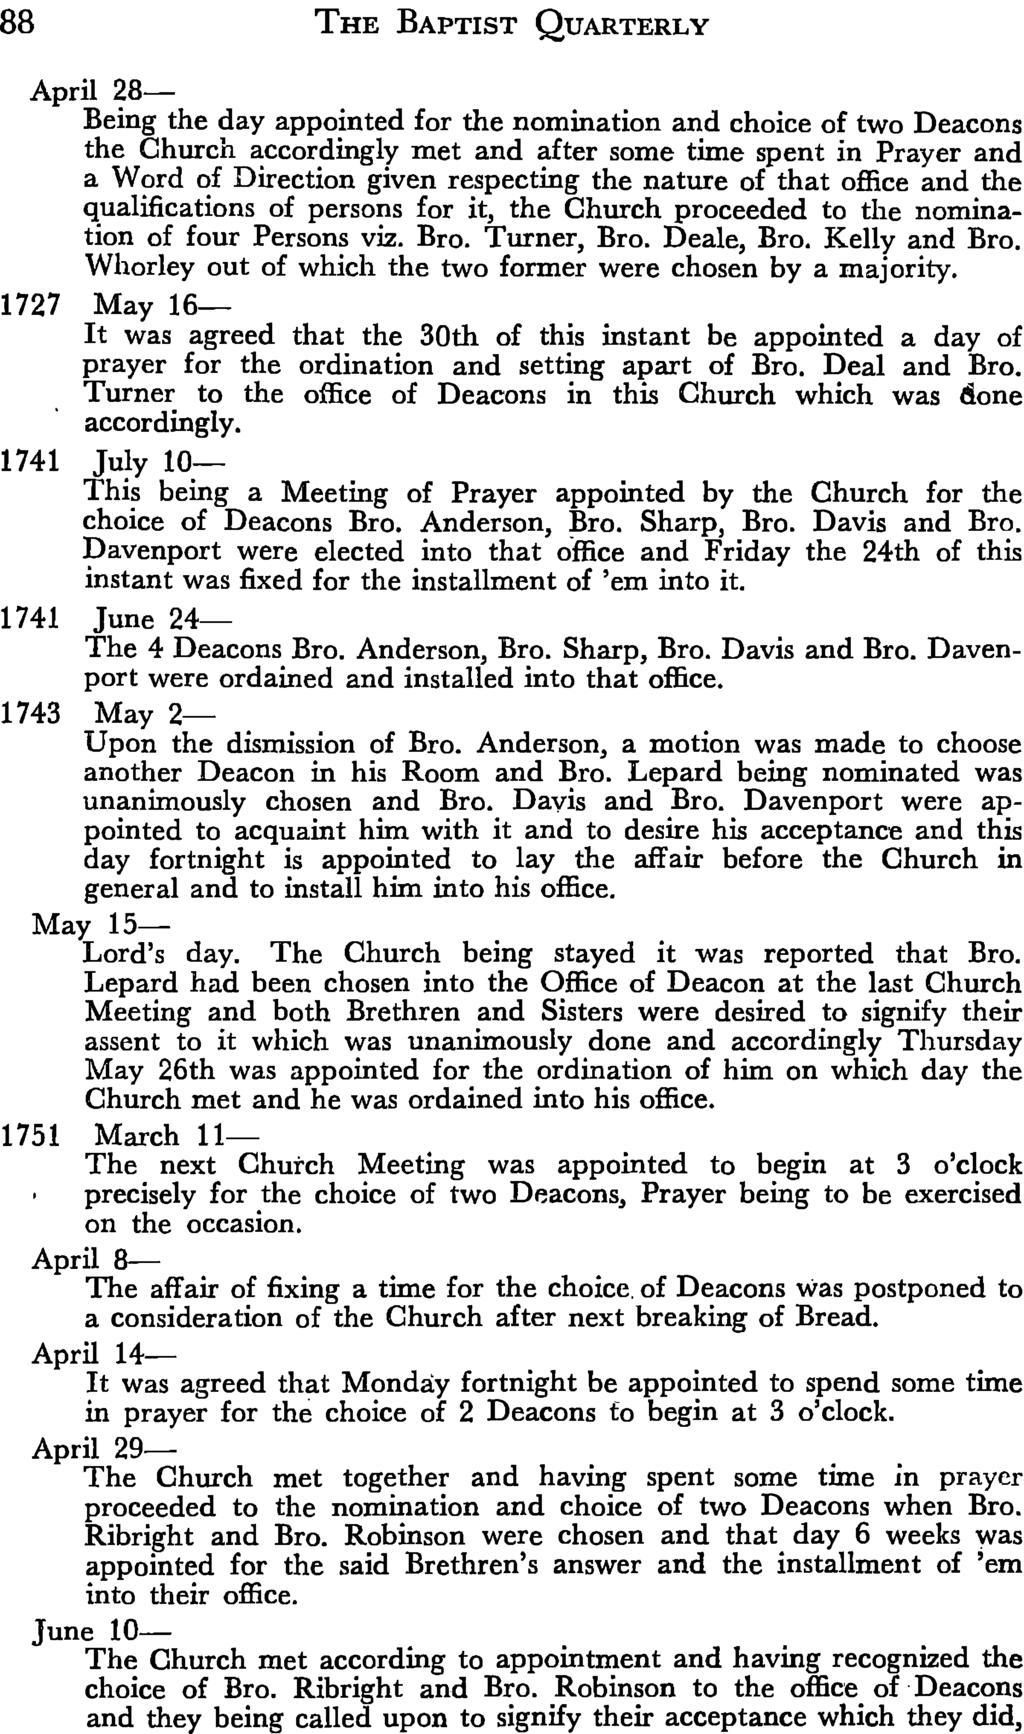 88 THE BAPTIST QUARTERLY April 28- Being the day appointed for the nomination and choice of two Deacons the Church accordingly met and after some time spent in Prayer and a Word of Direction given